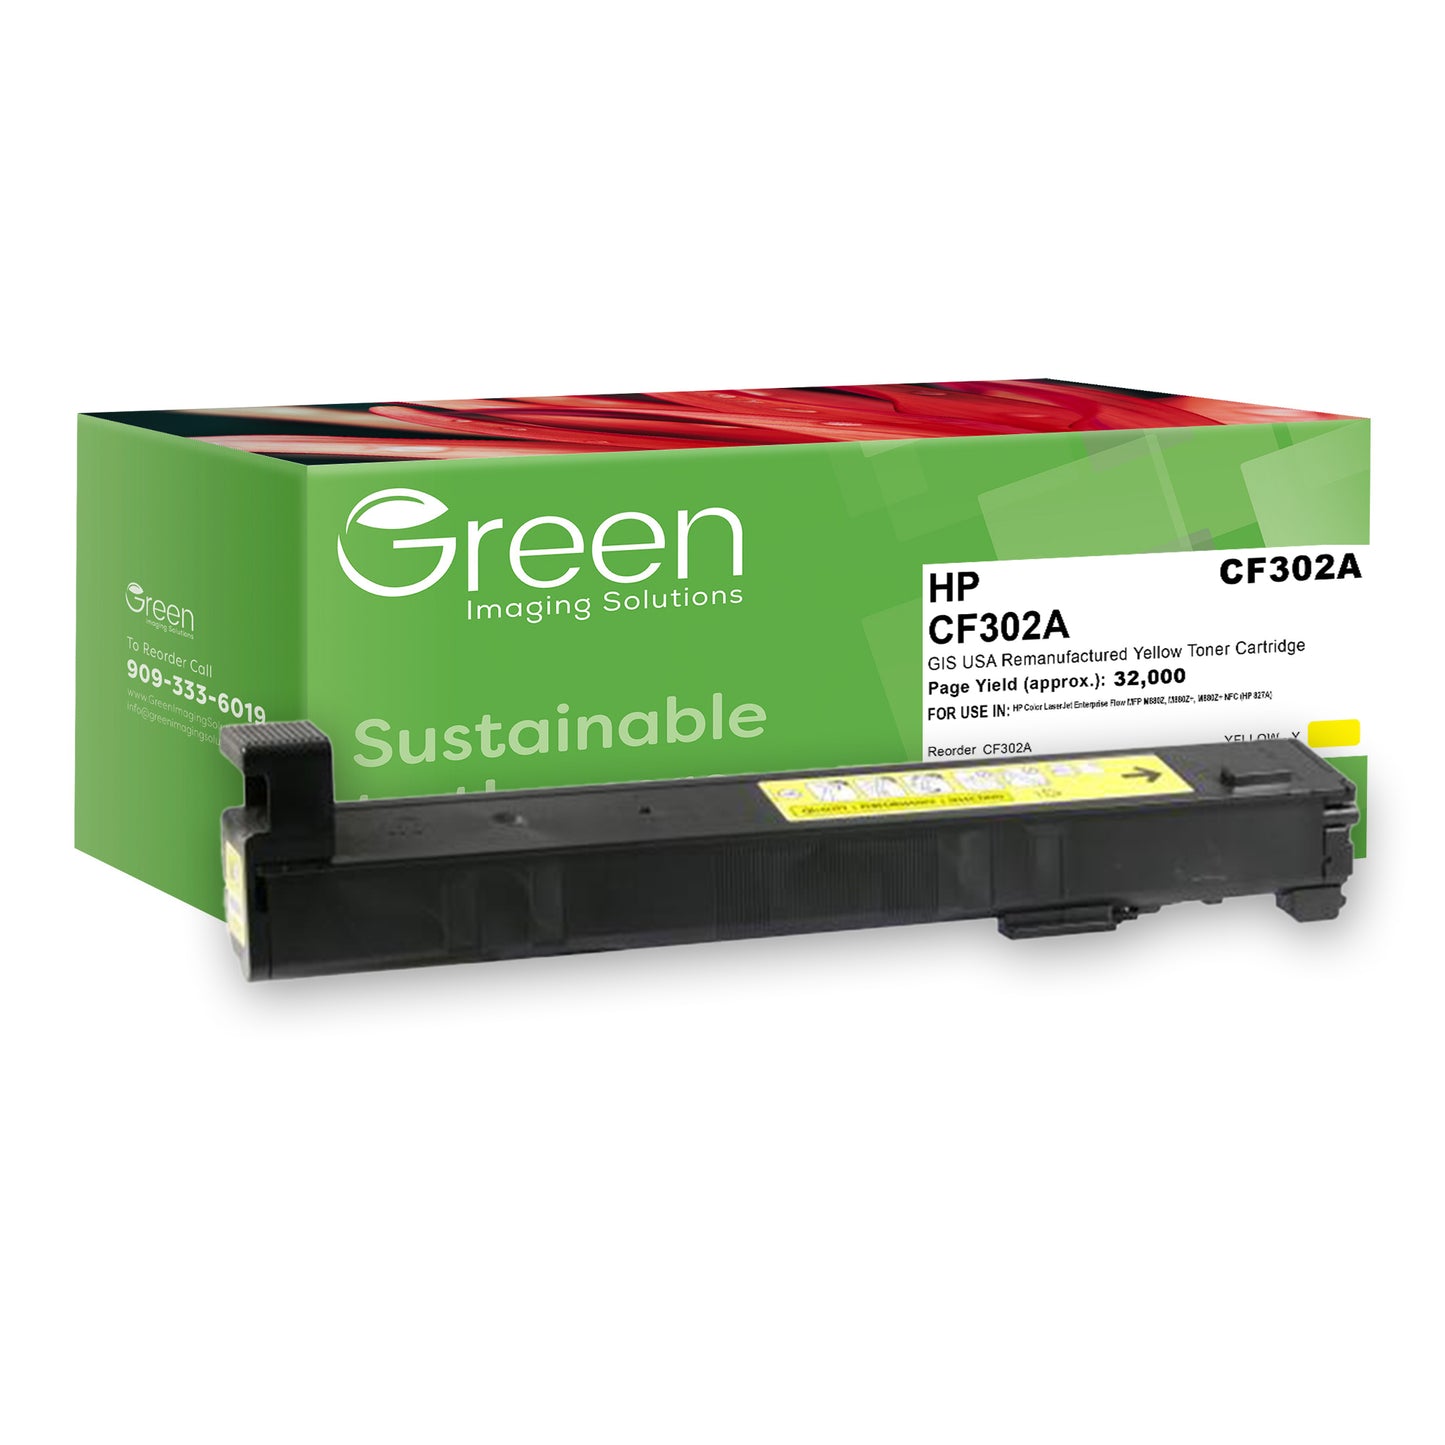 Green Imaging Solutions USA Remanufactured Yellow Toner Cartridge for HP 827A (CF302A)